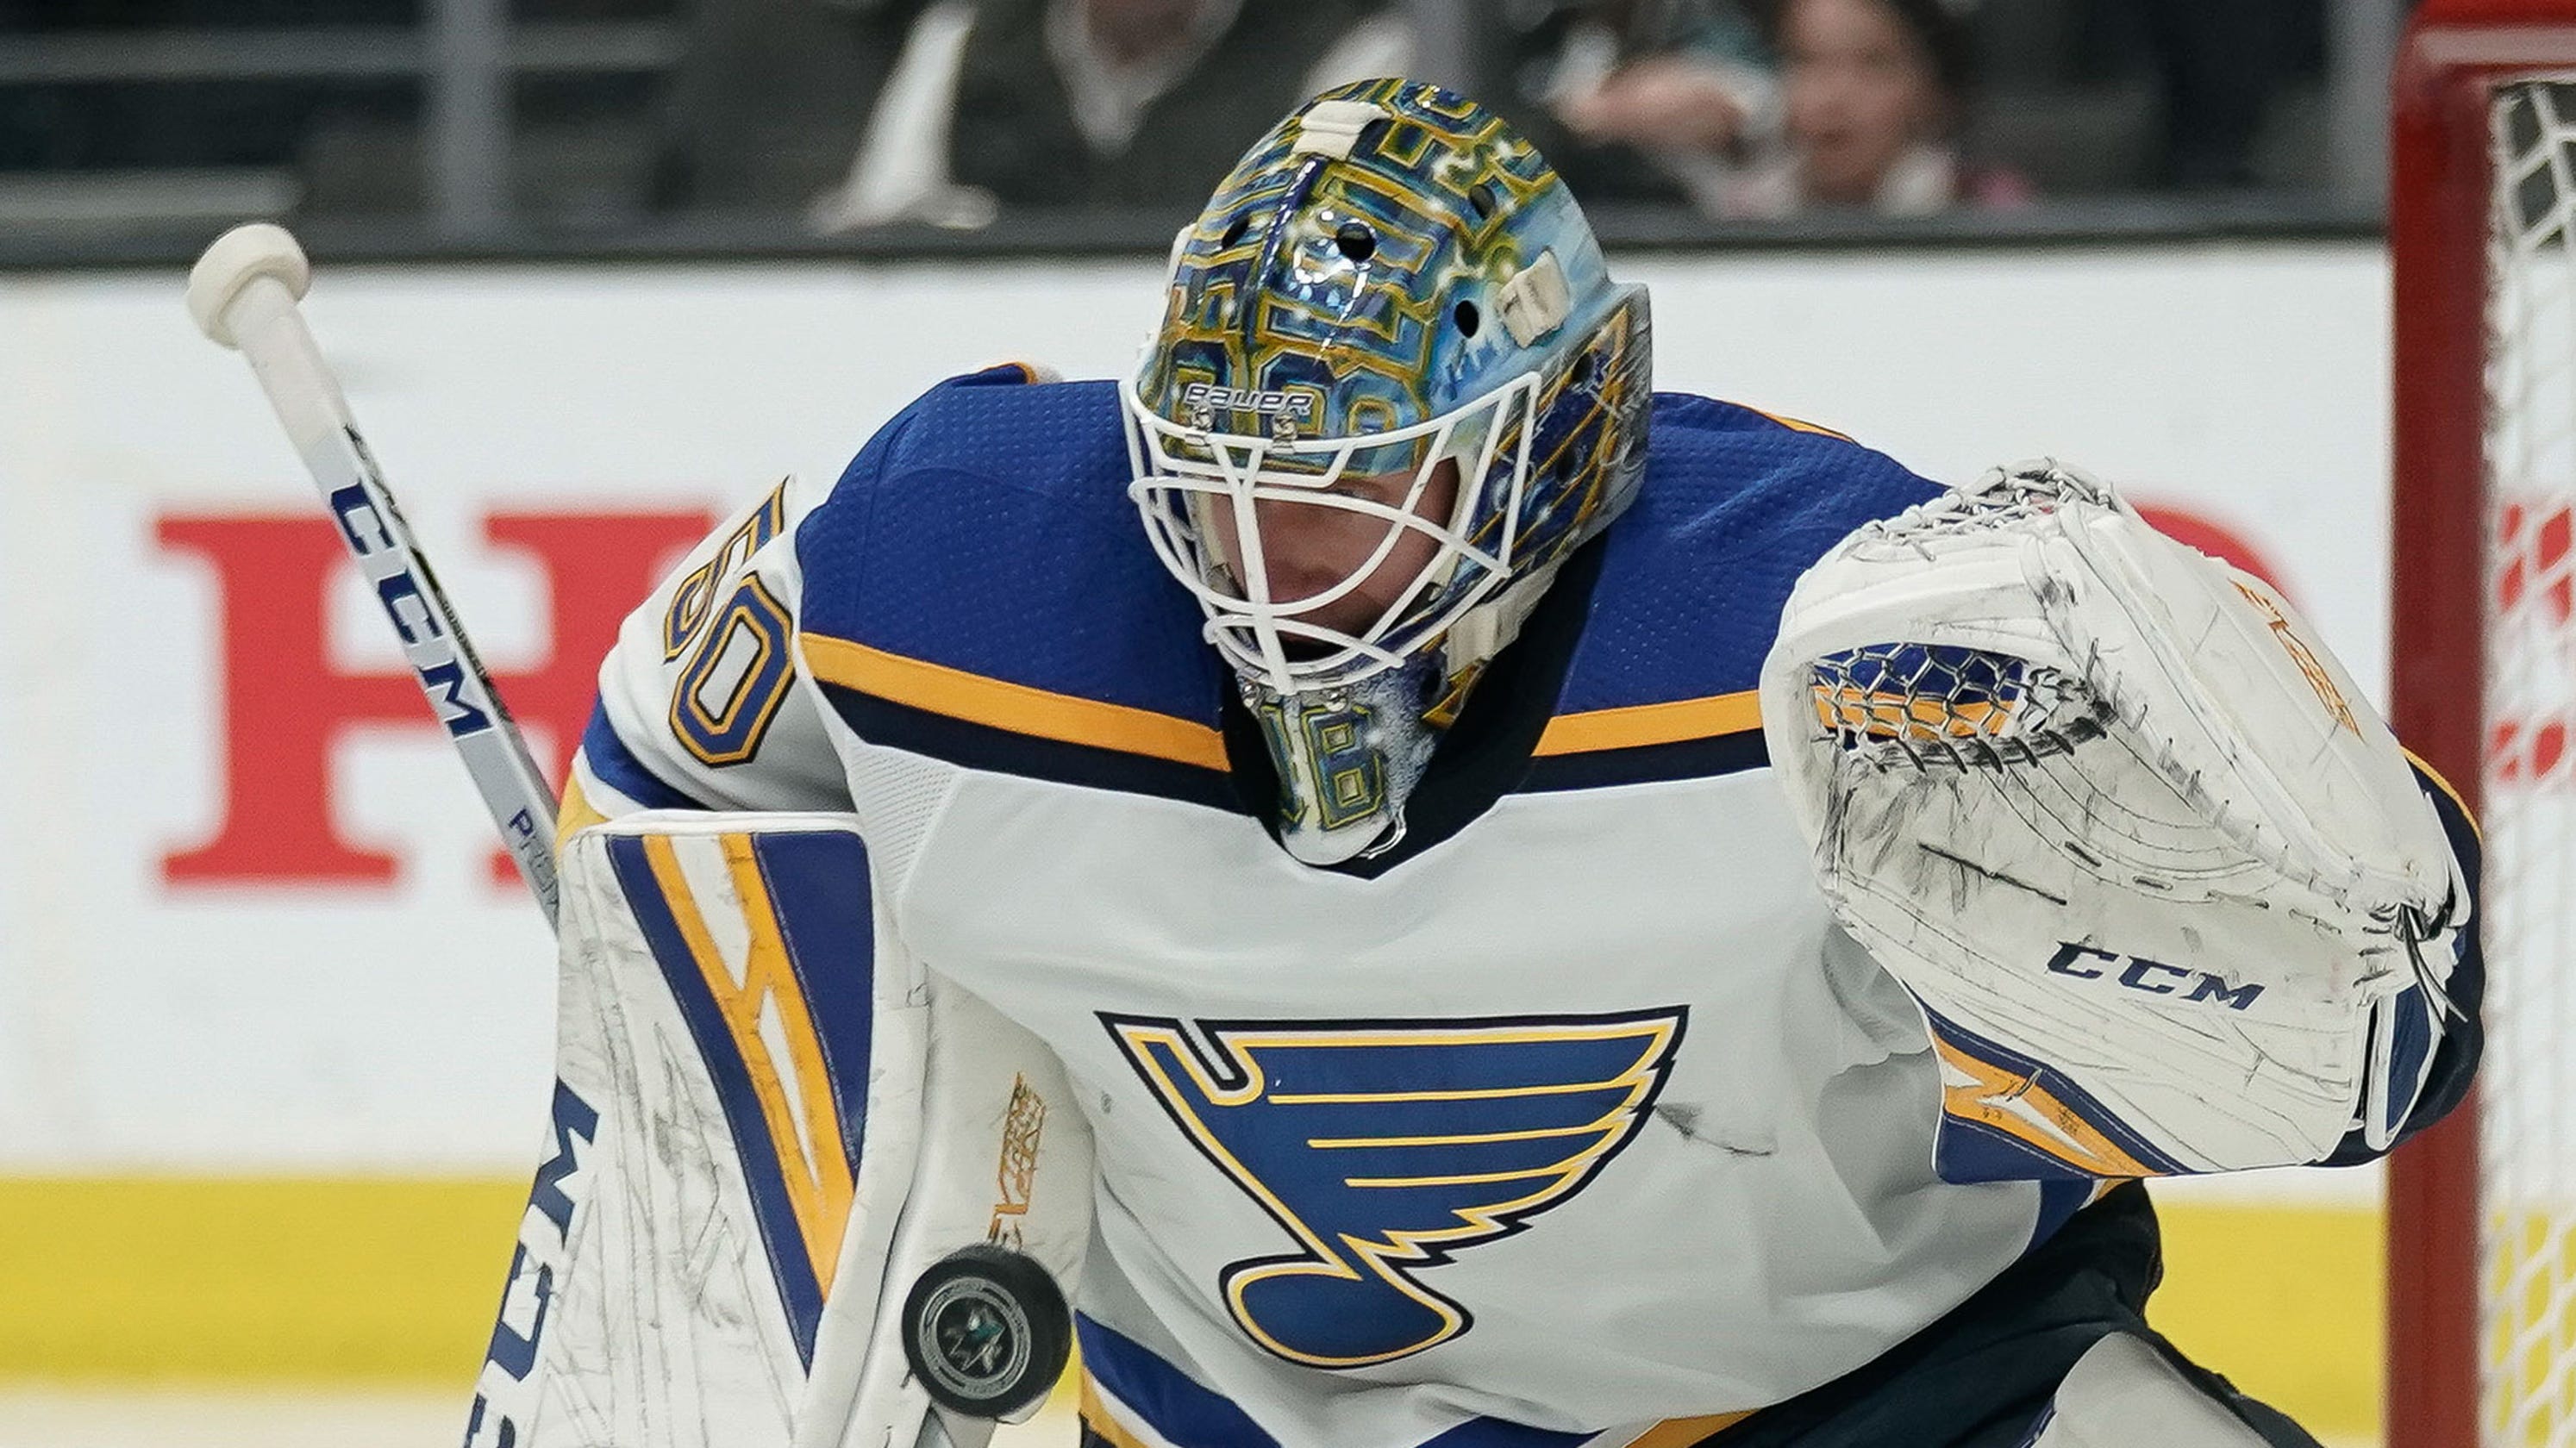 Stanley Cup 2019 NHL playoffs: How to watch; Blues, Bruins key facts